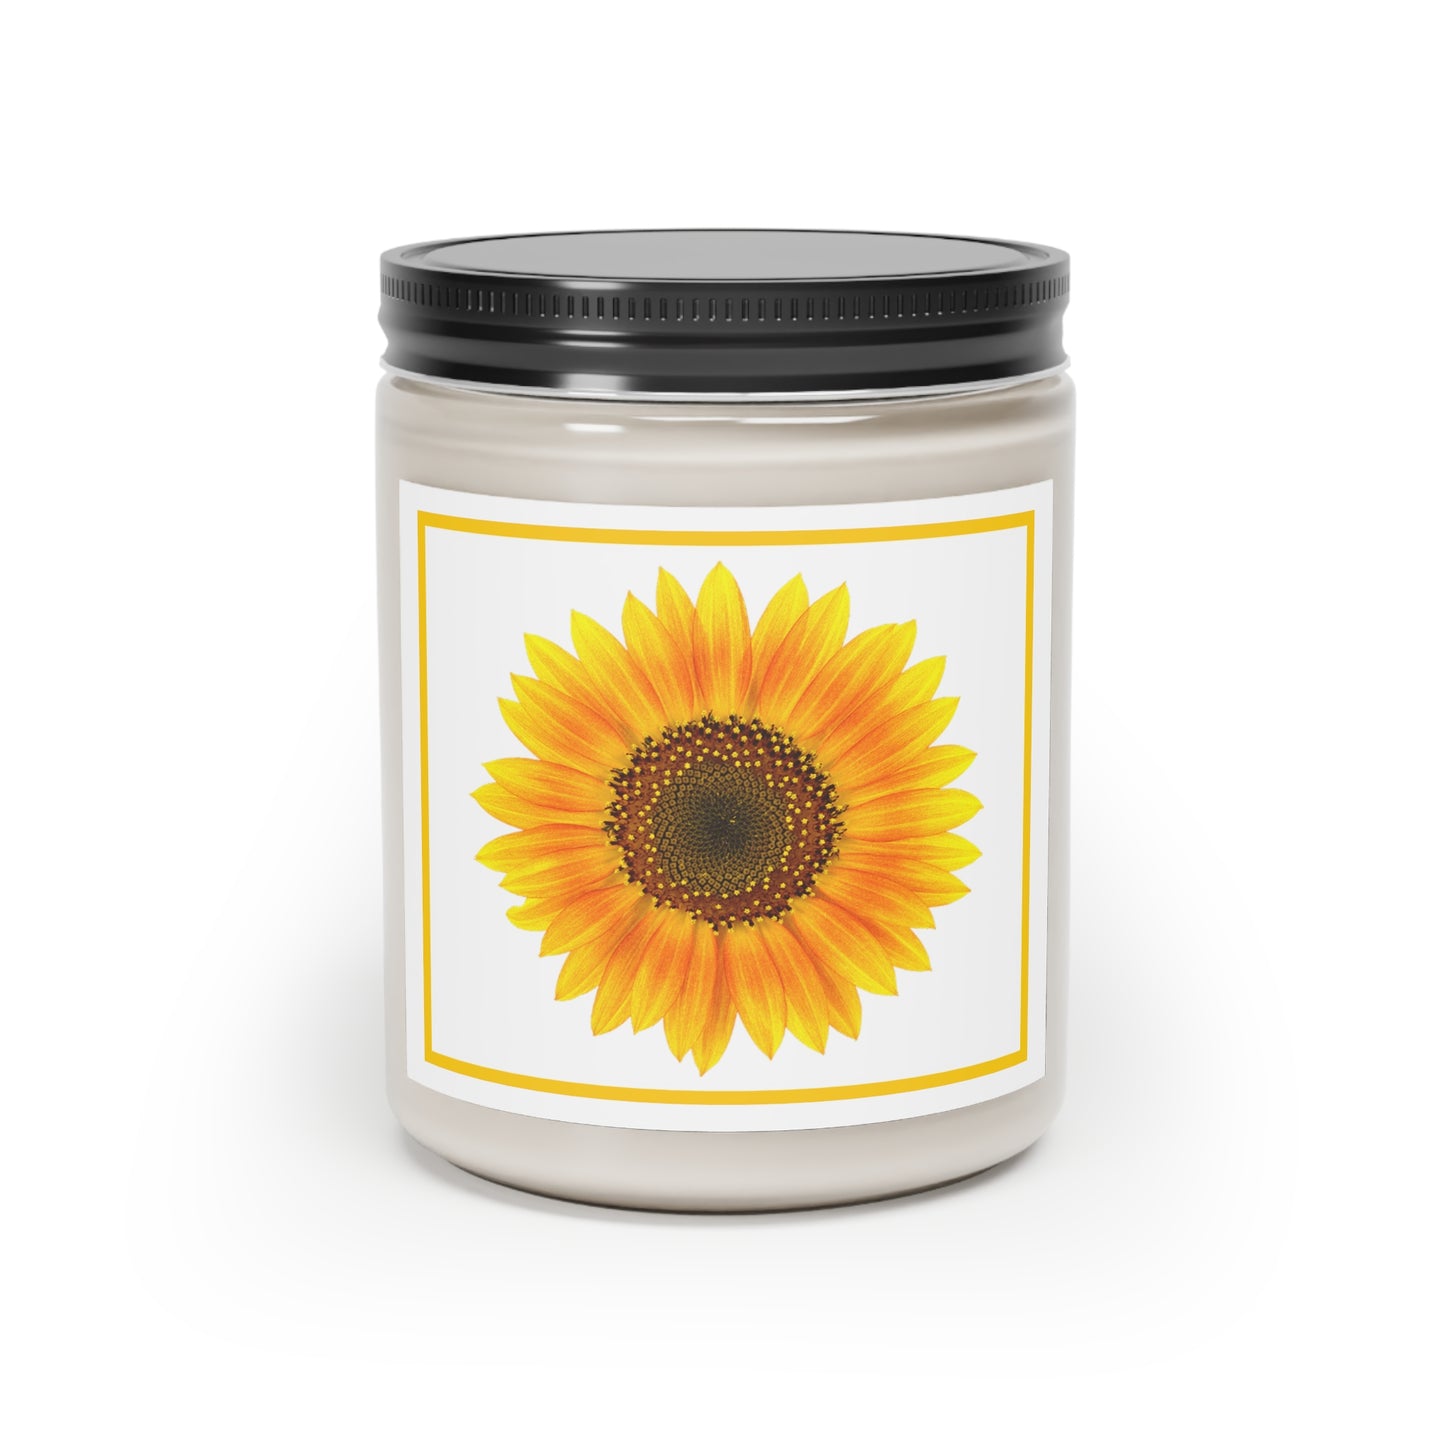 Yellow Sunflower-themed Candle: 9 oz.; Scented; Hand-poured